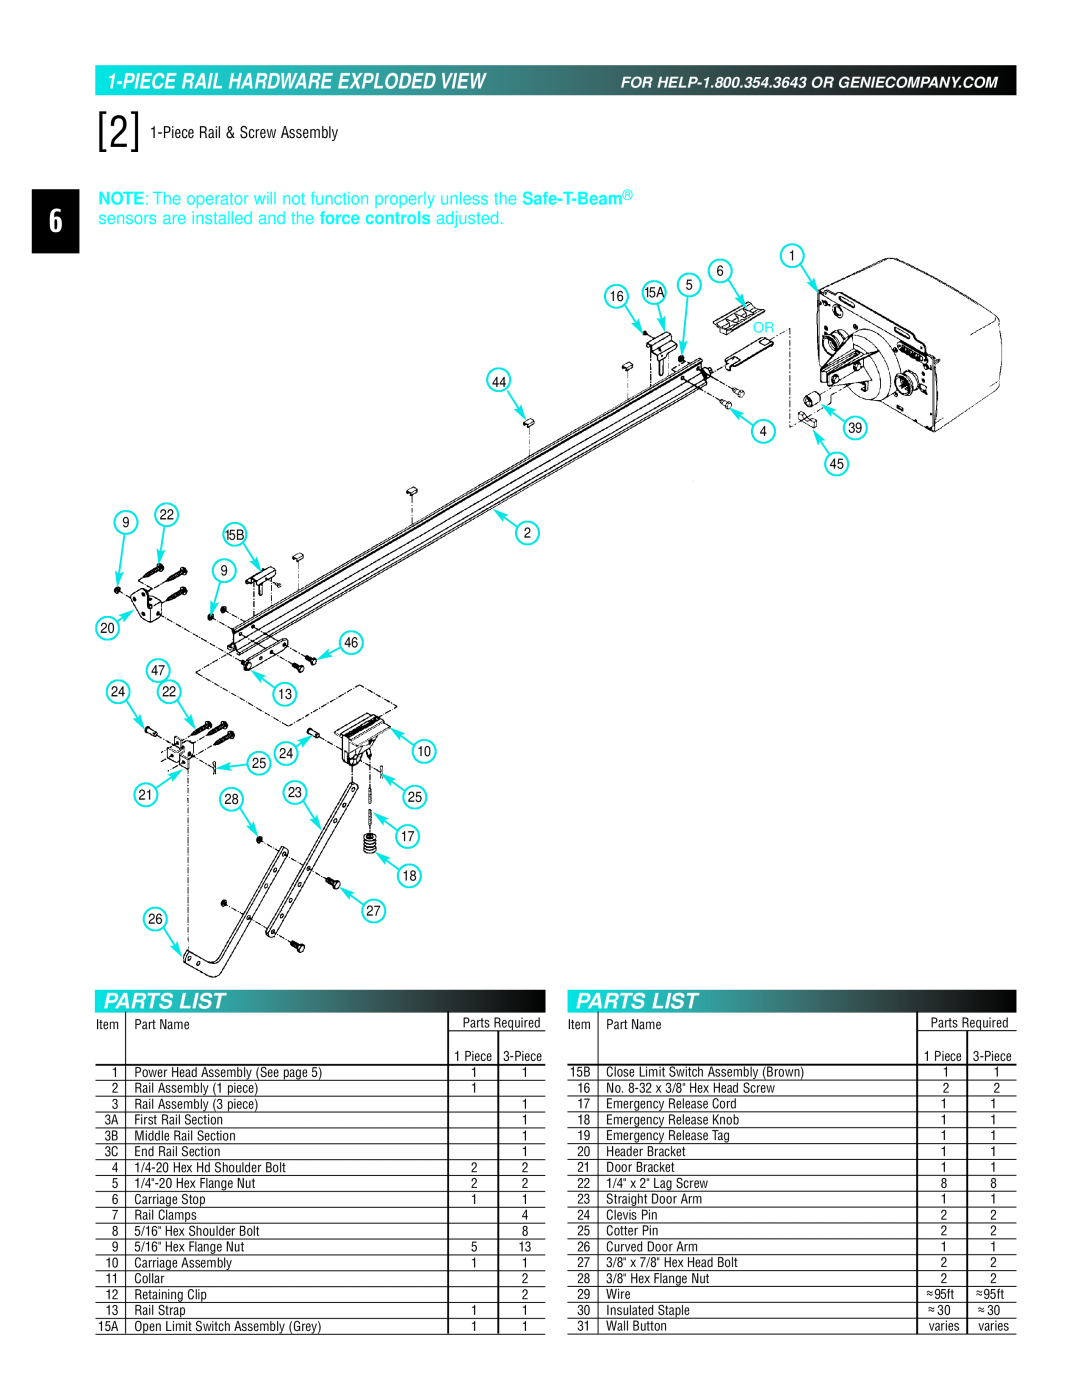 Genie 3511035556 Piece Rail Hardware Exploded View, Parts List, sensors are installed and the force controls adjusted 